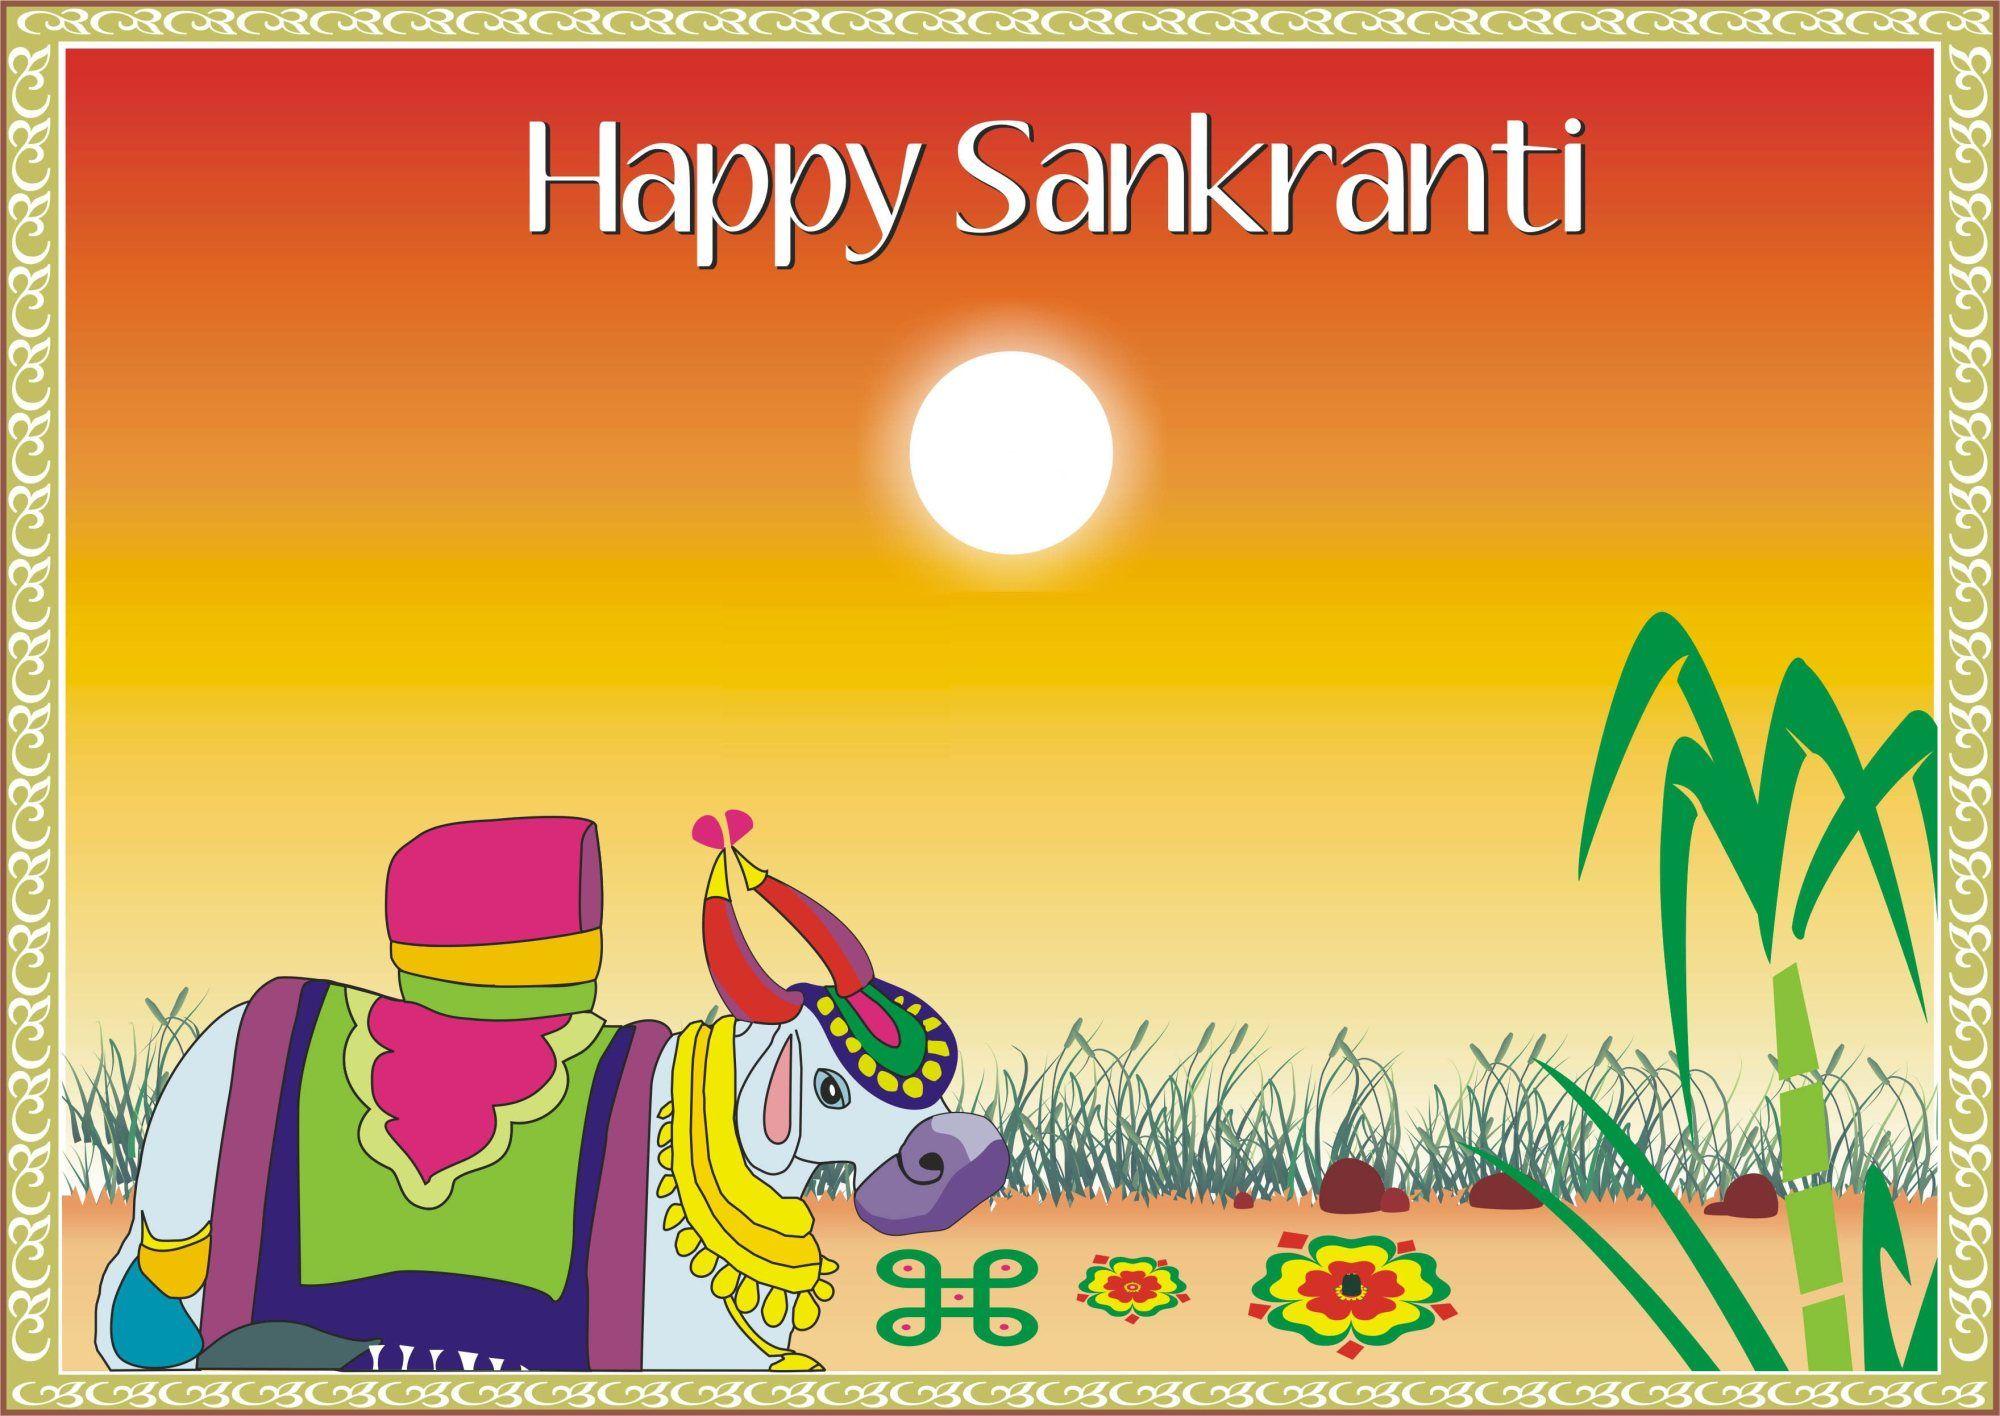 Download Makar Sankranti Wallpaper for 2013 with Quote. Wallpaper